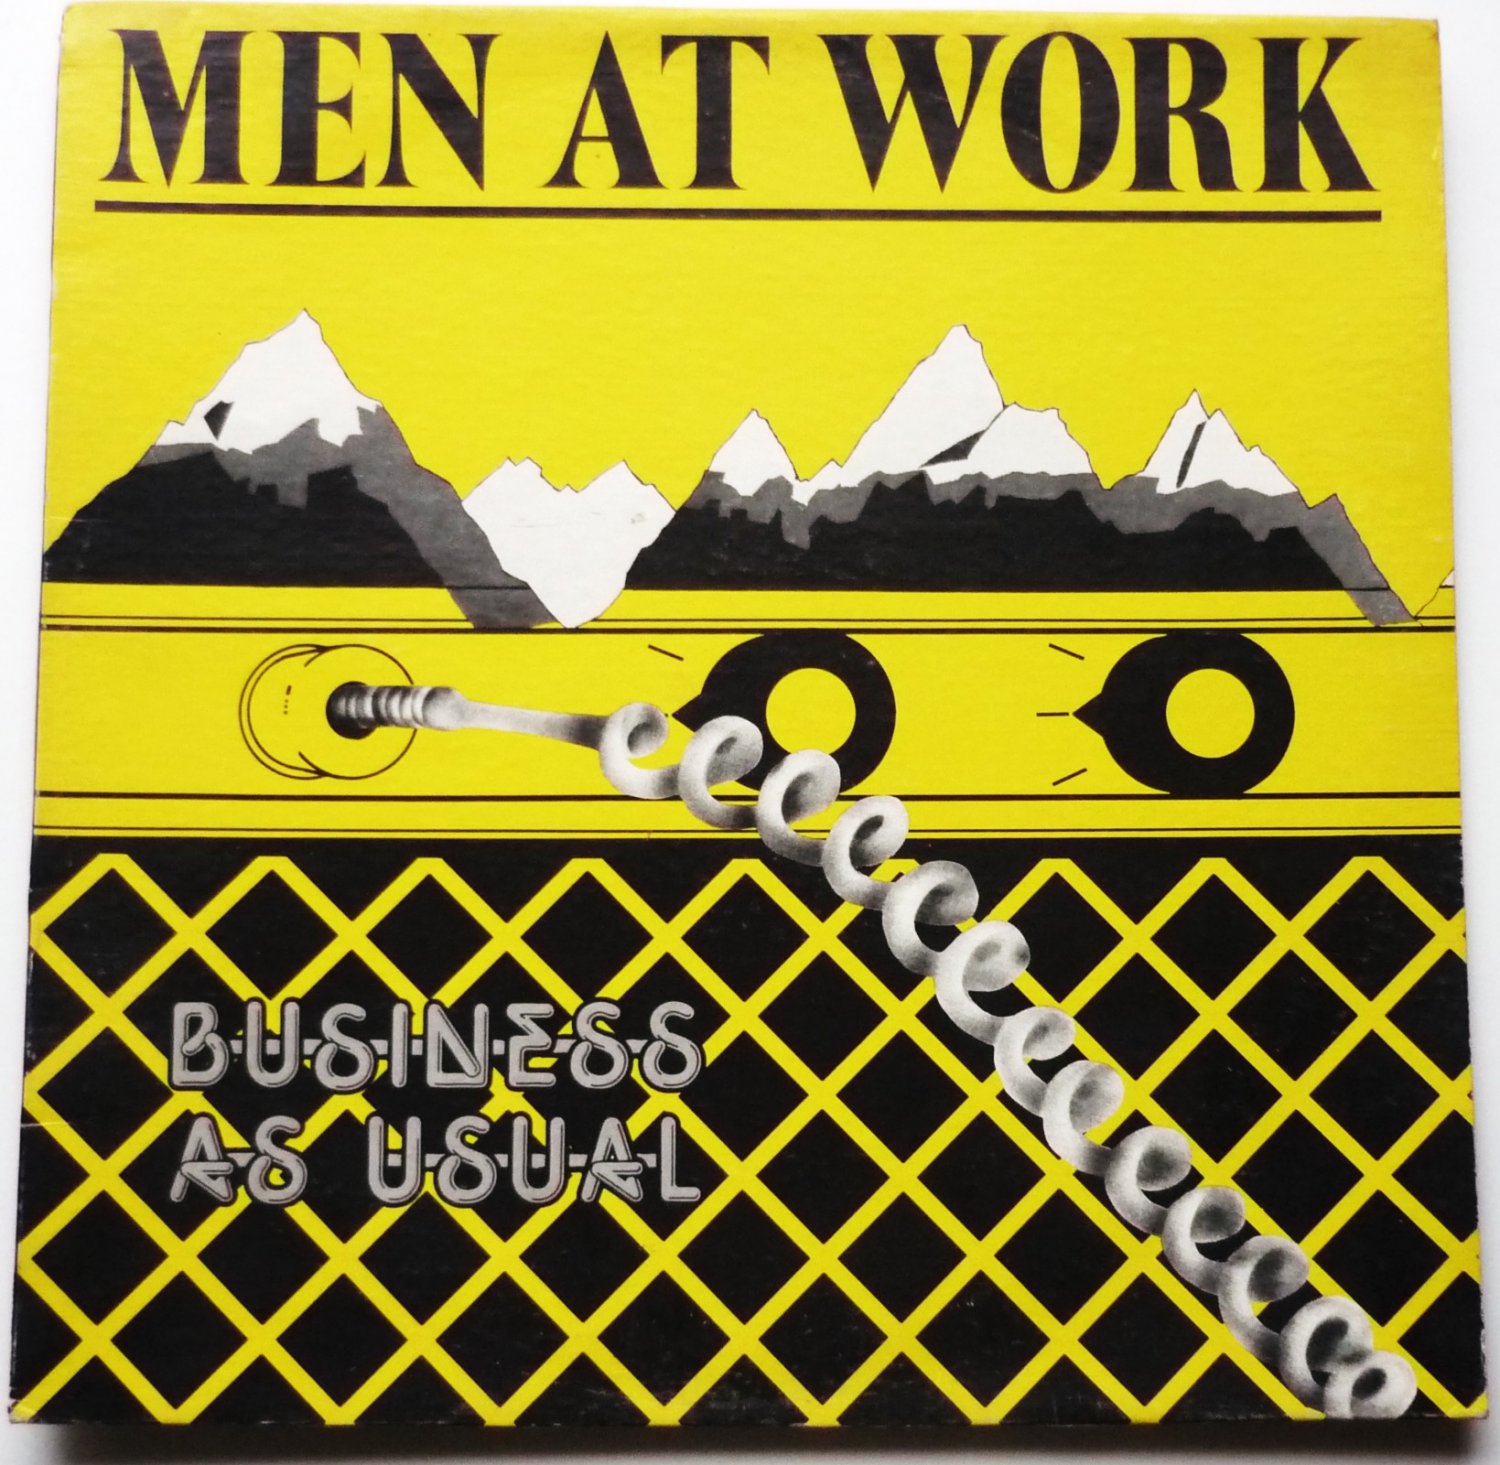 Men at Work lp Business as Usual fc37978